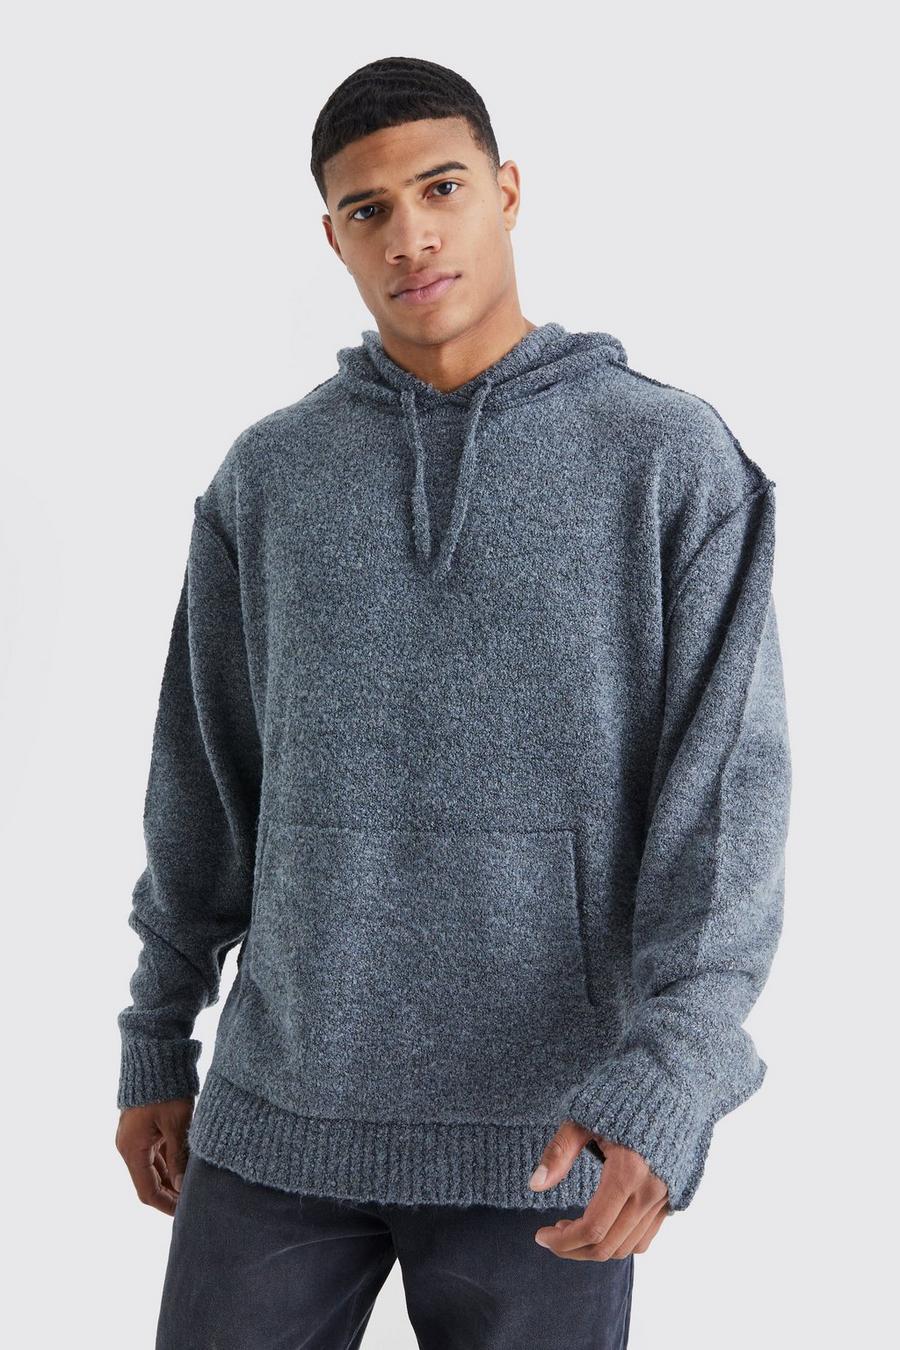 Charcoal grey Oversized Boucle Knit Hoodie With Exposed Seams